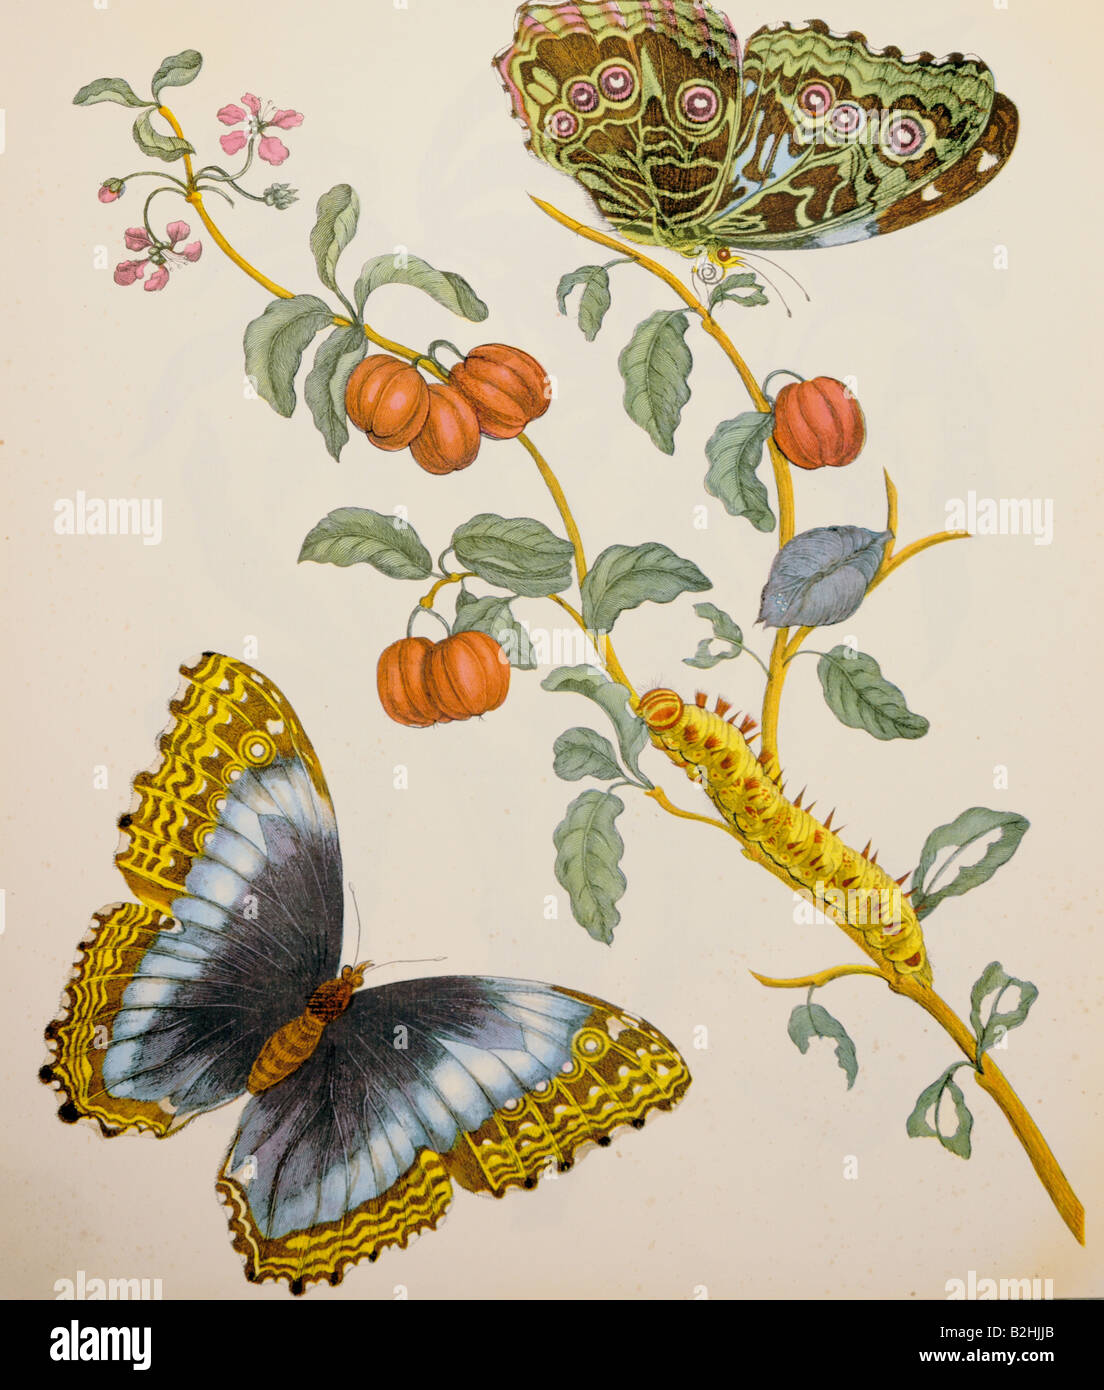 zoology, insect, butterfly, caterpillar, blooming bush, copper engraving, watercoloured, from 'Metamorphosis insectorum Surinamensium', by Maria Sibylla Merian (1647 - 1717), Amsterdam, Netherlands, 1705, private collection, Artist's Copyright has not to be cleared Stock Photo